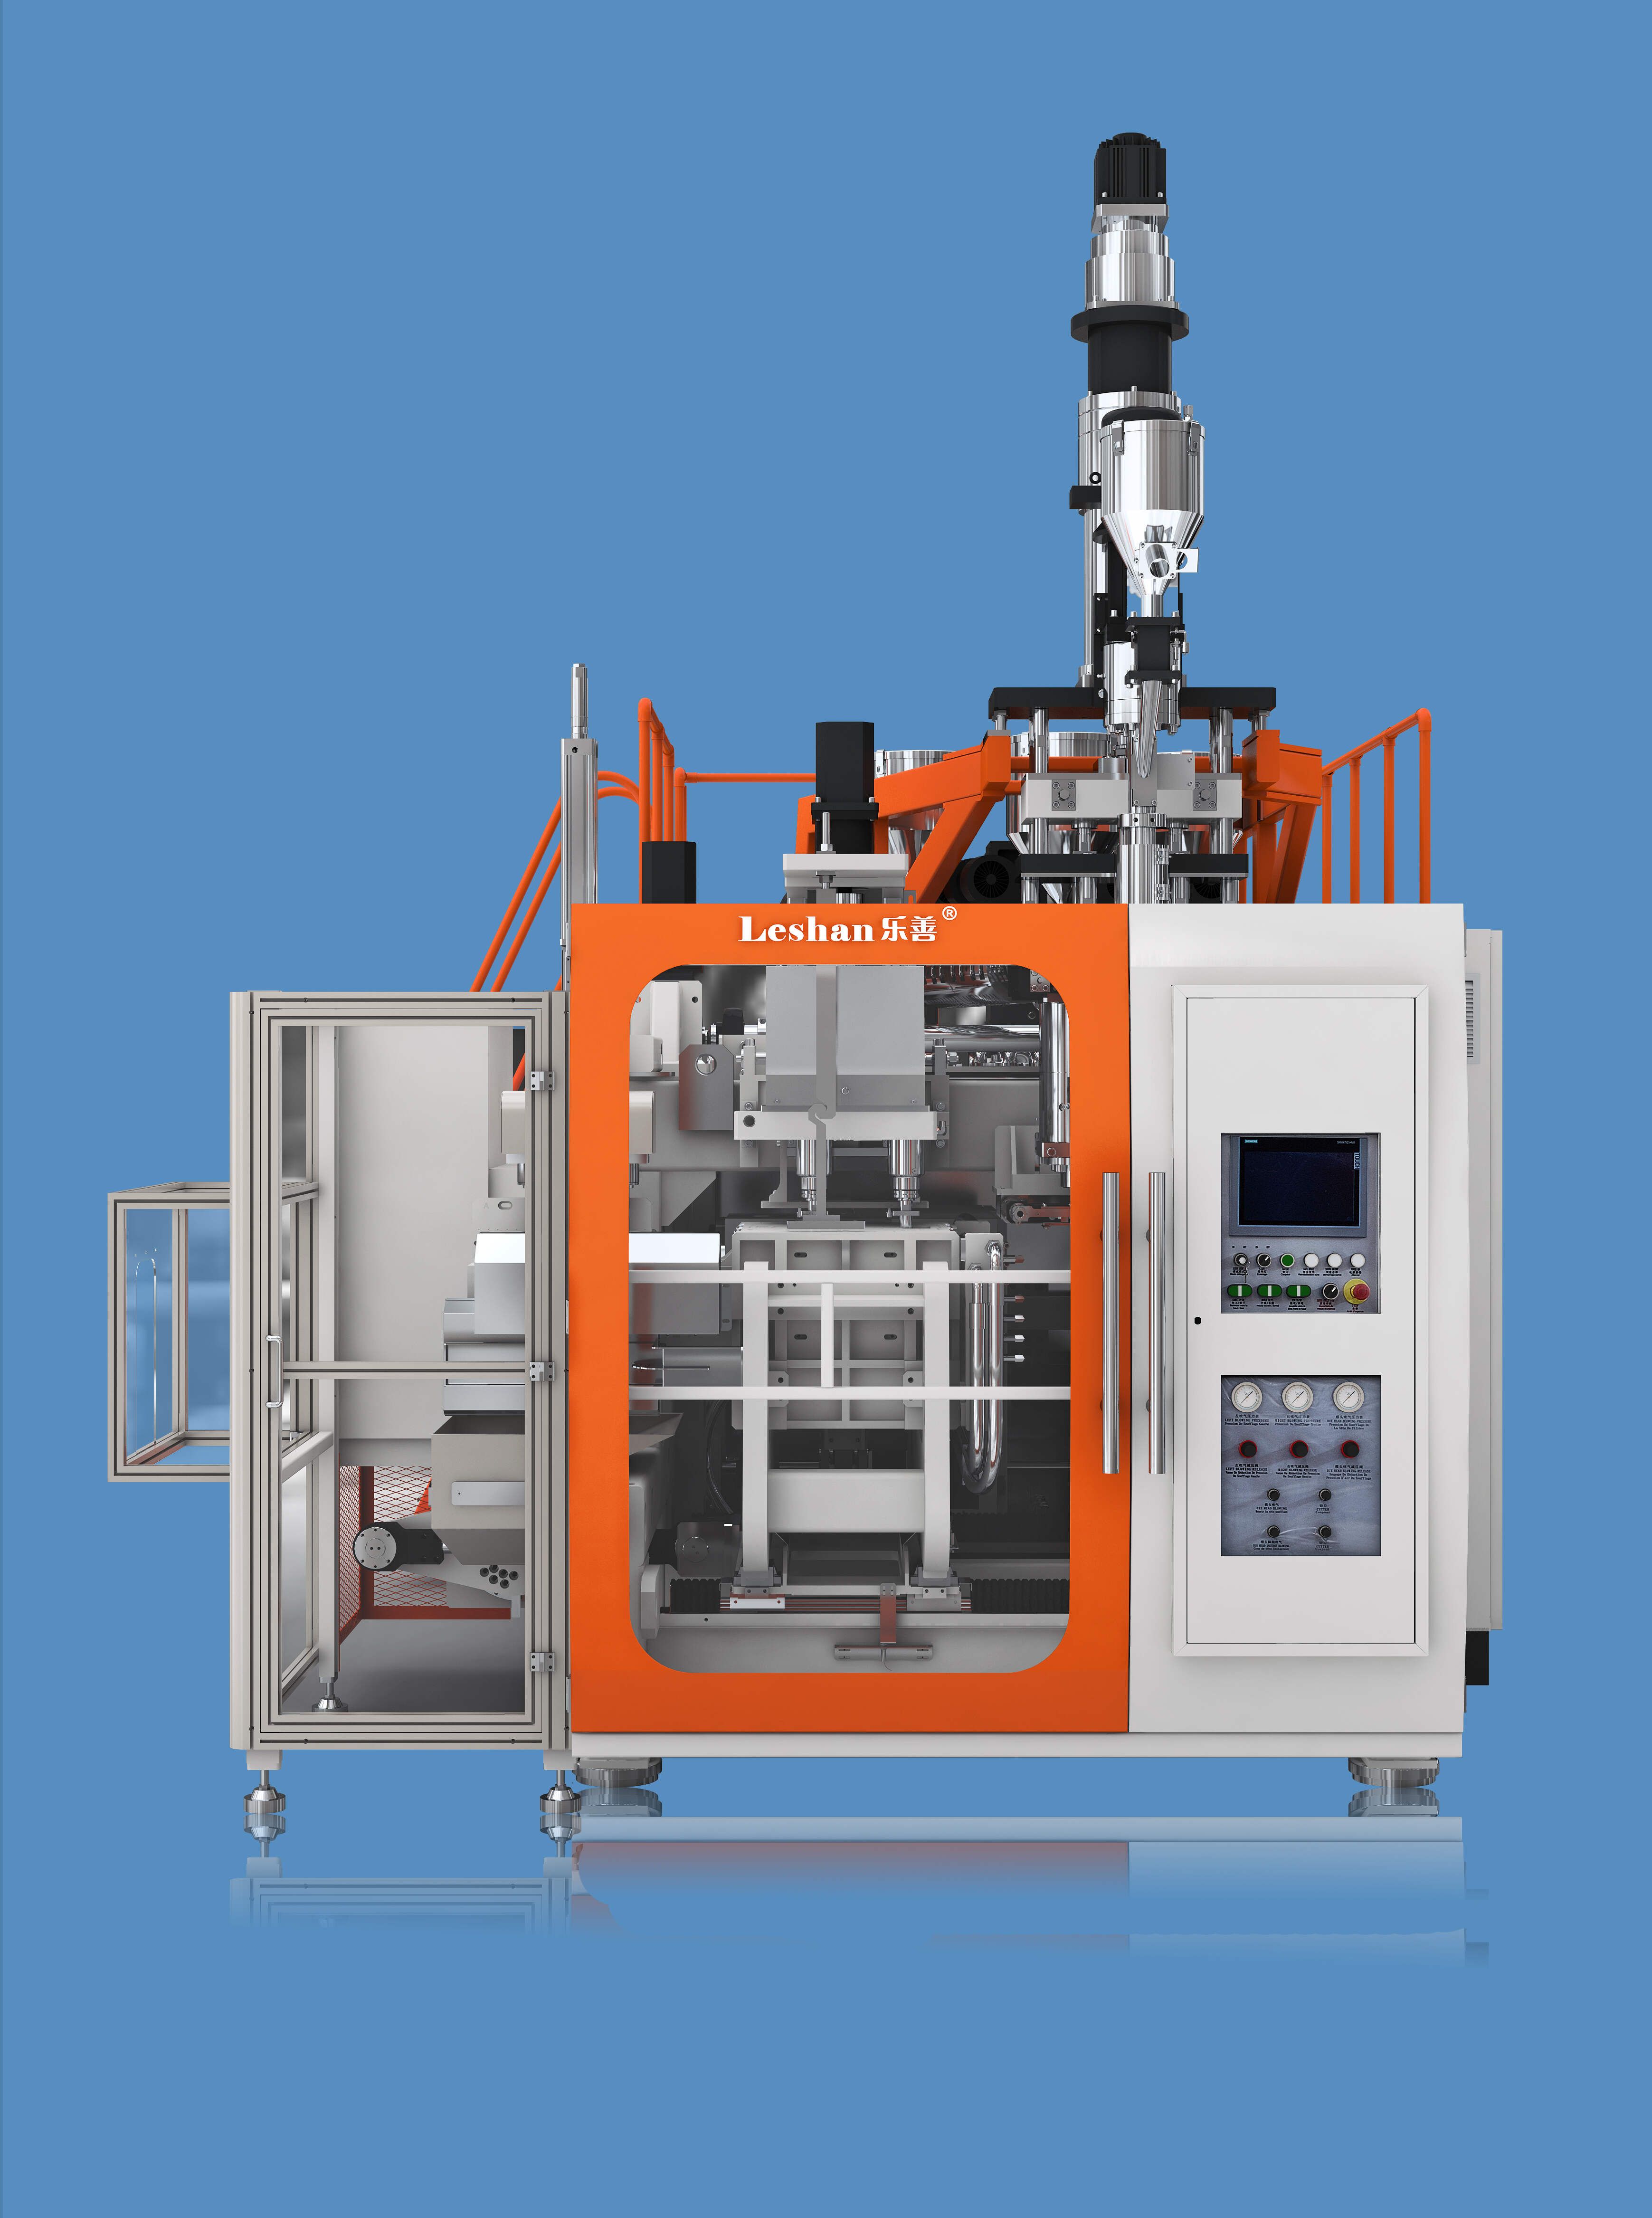 How do 220l drum blow molding machine manufacturers control variables like temperature, pressure, and blow time in the blow molding process to ensure consistent product quality?